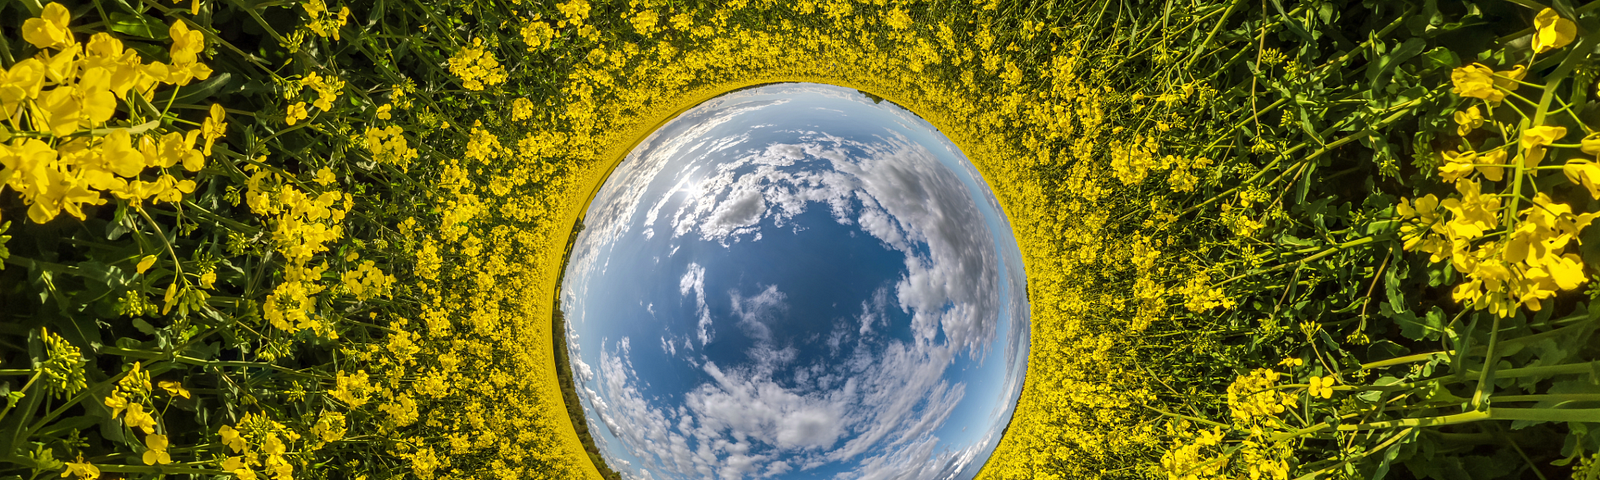 A fish-eye photo of the sky and flowers